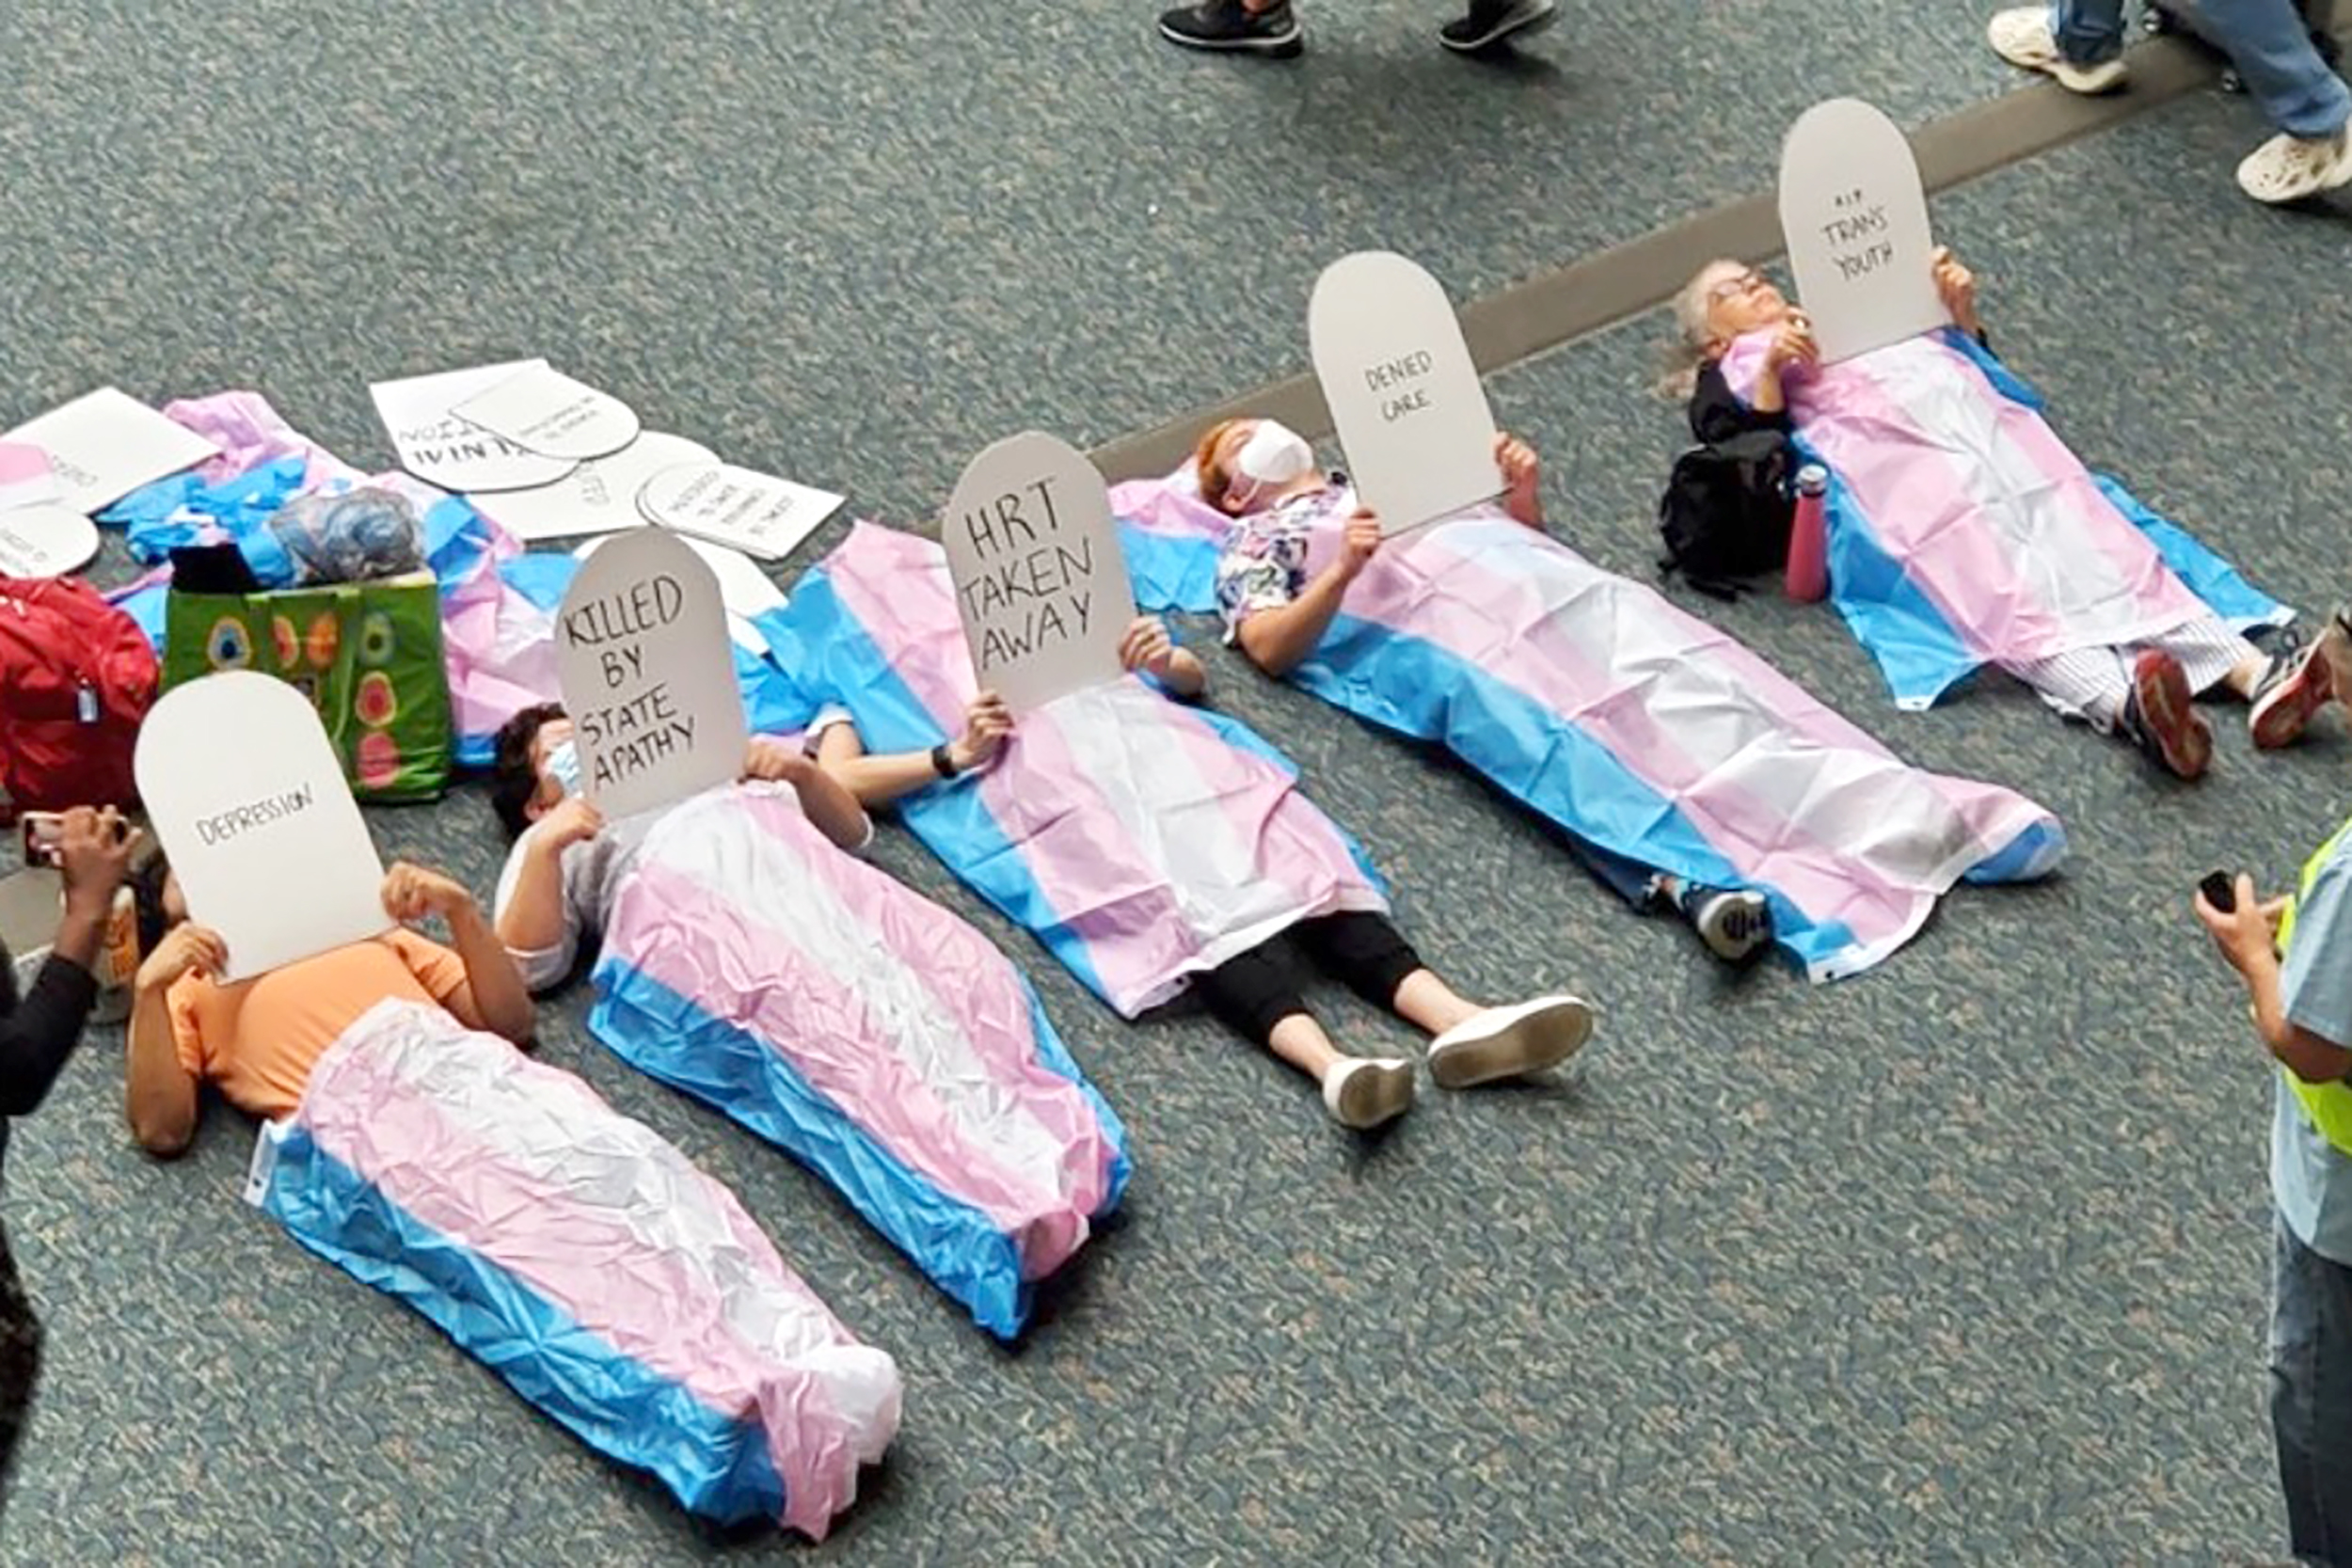 Protesters stage a "die-in" in the lobby of the Orlando International Airport on Oct. 28, 2022